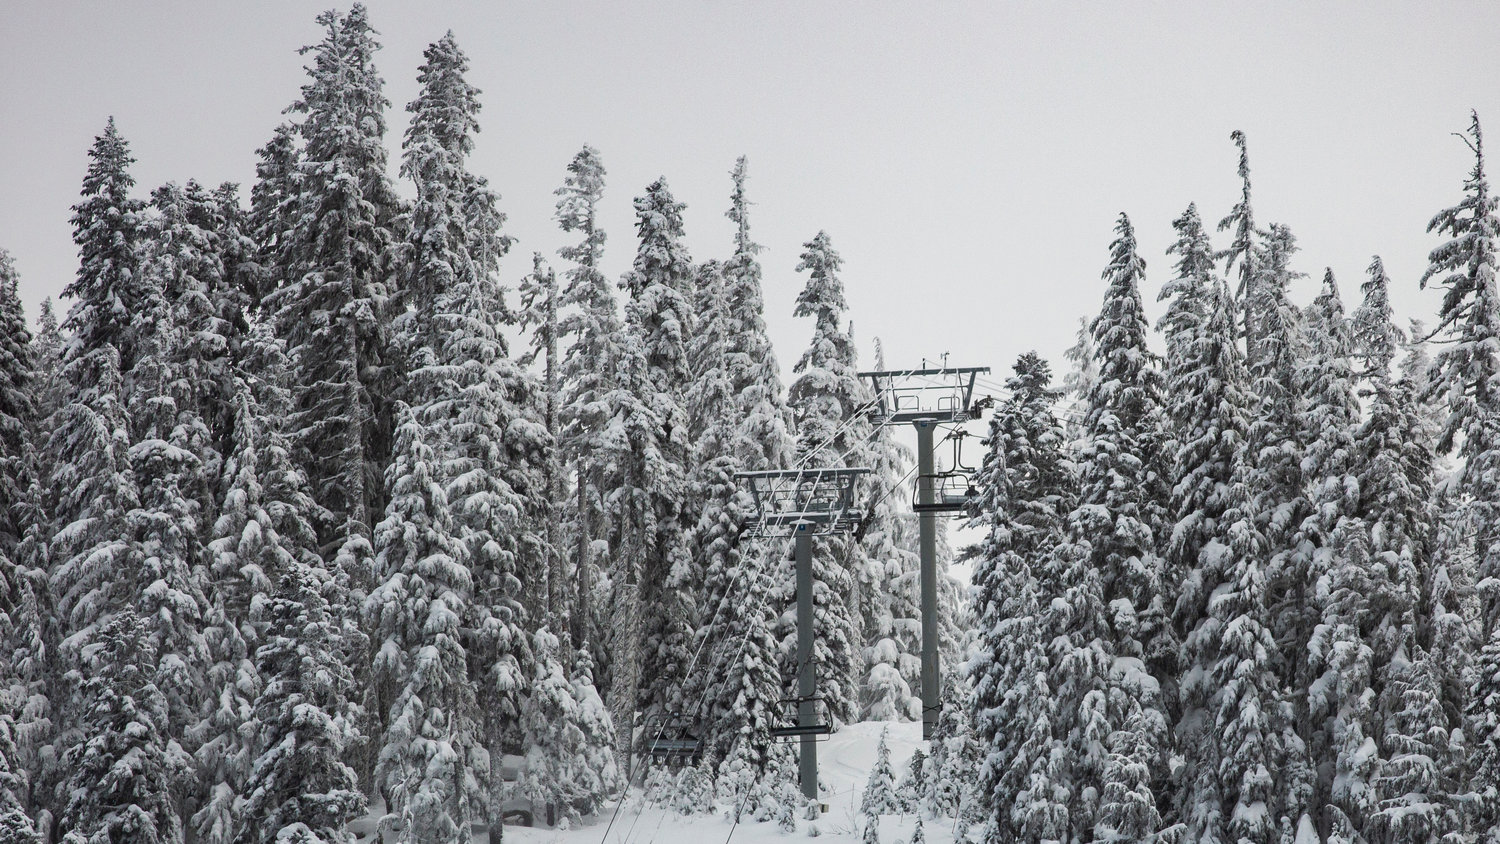 Chair lifts are seen through snow-covered evergreen trees at White Pass Ski Area on the line between Lewis and Yakima counties on Tuesday afternoon.